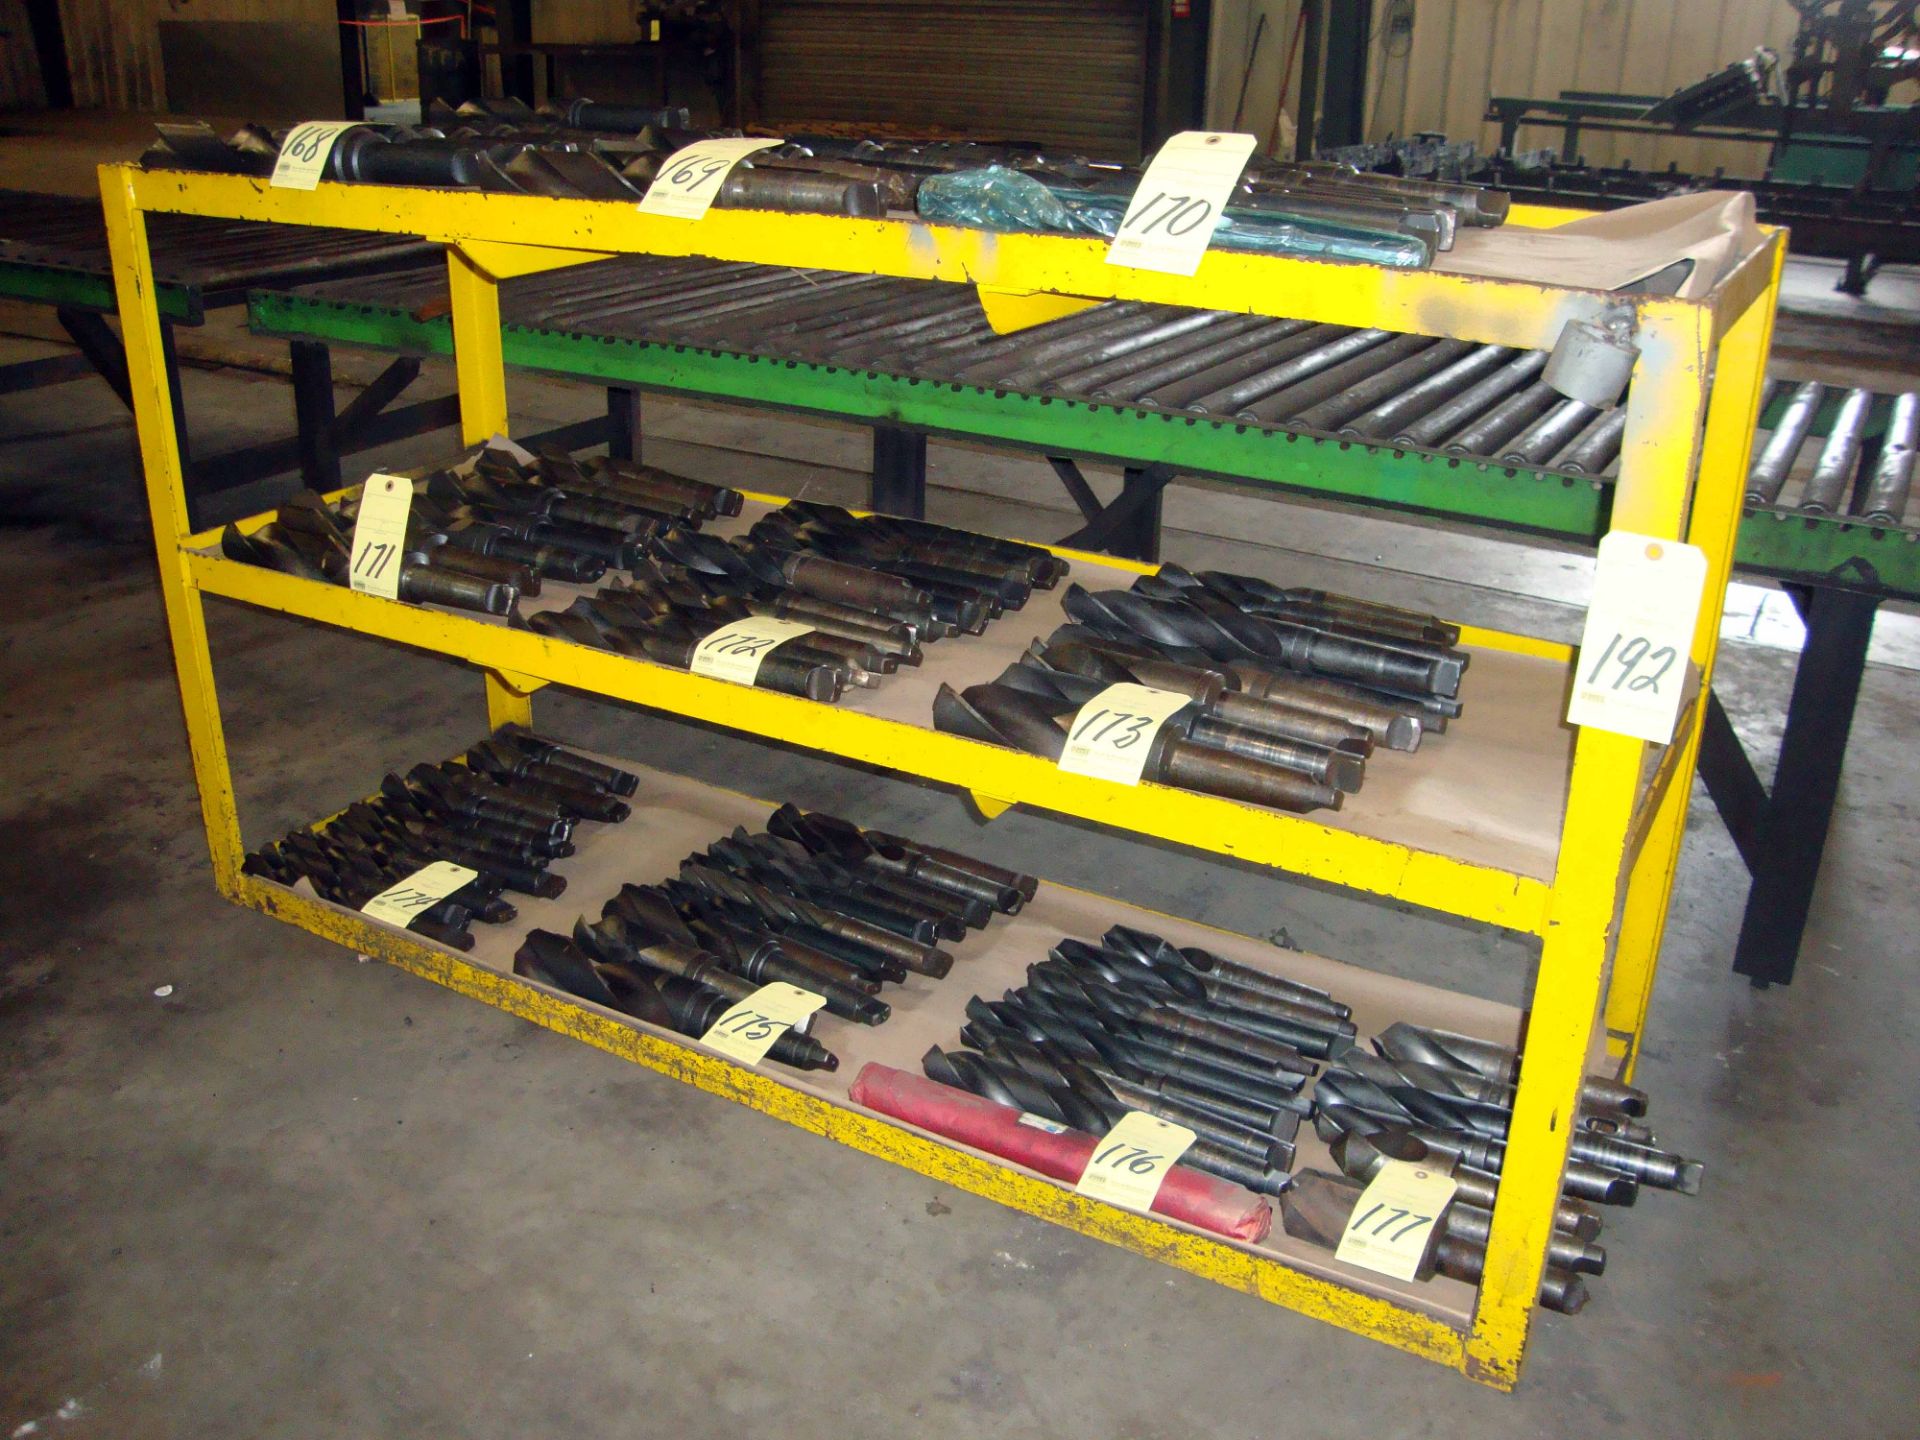 STEEL RACK SECTION, 24" x 68" (may not be taken until tooling has been removed)